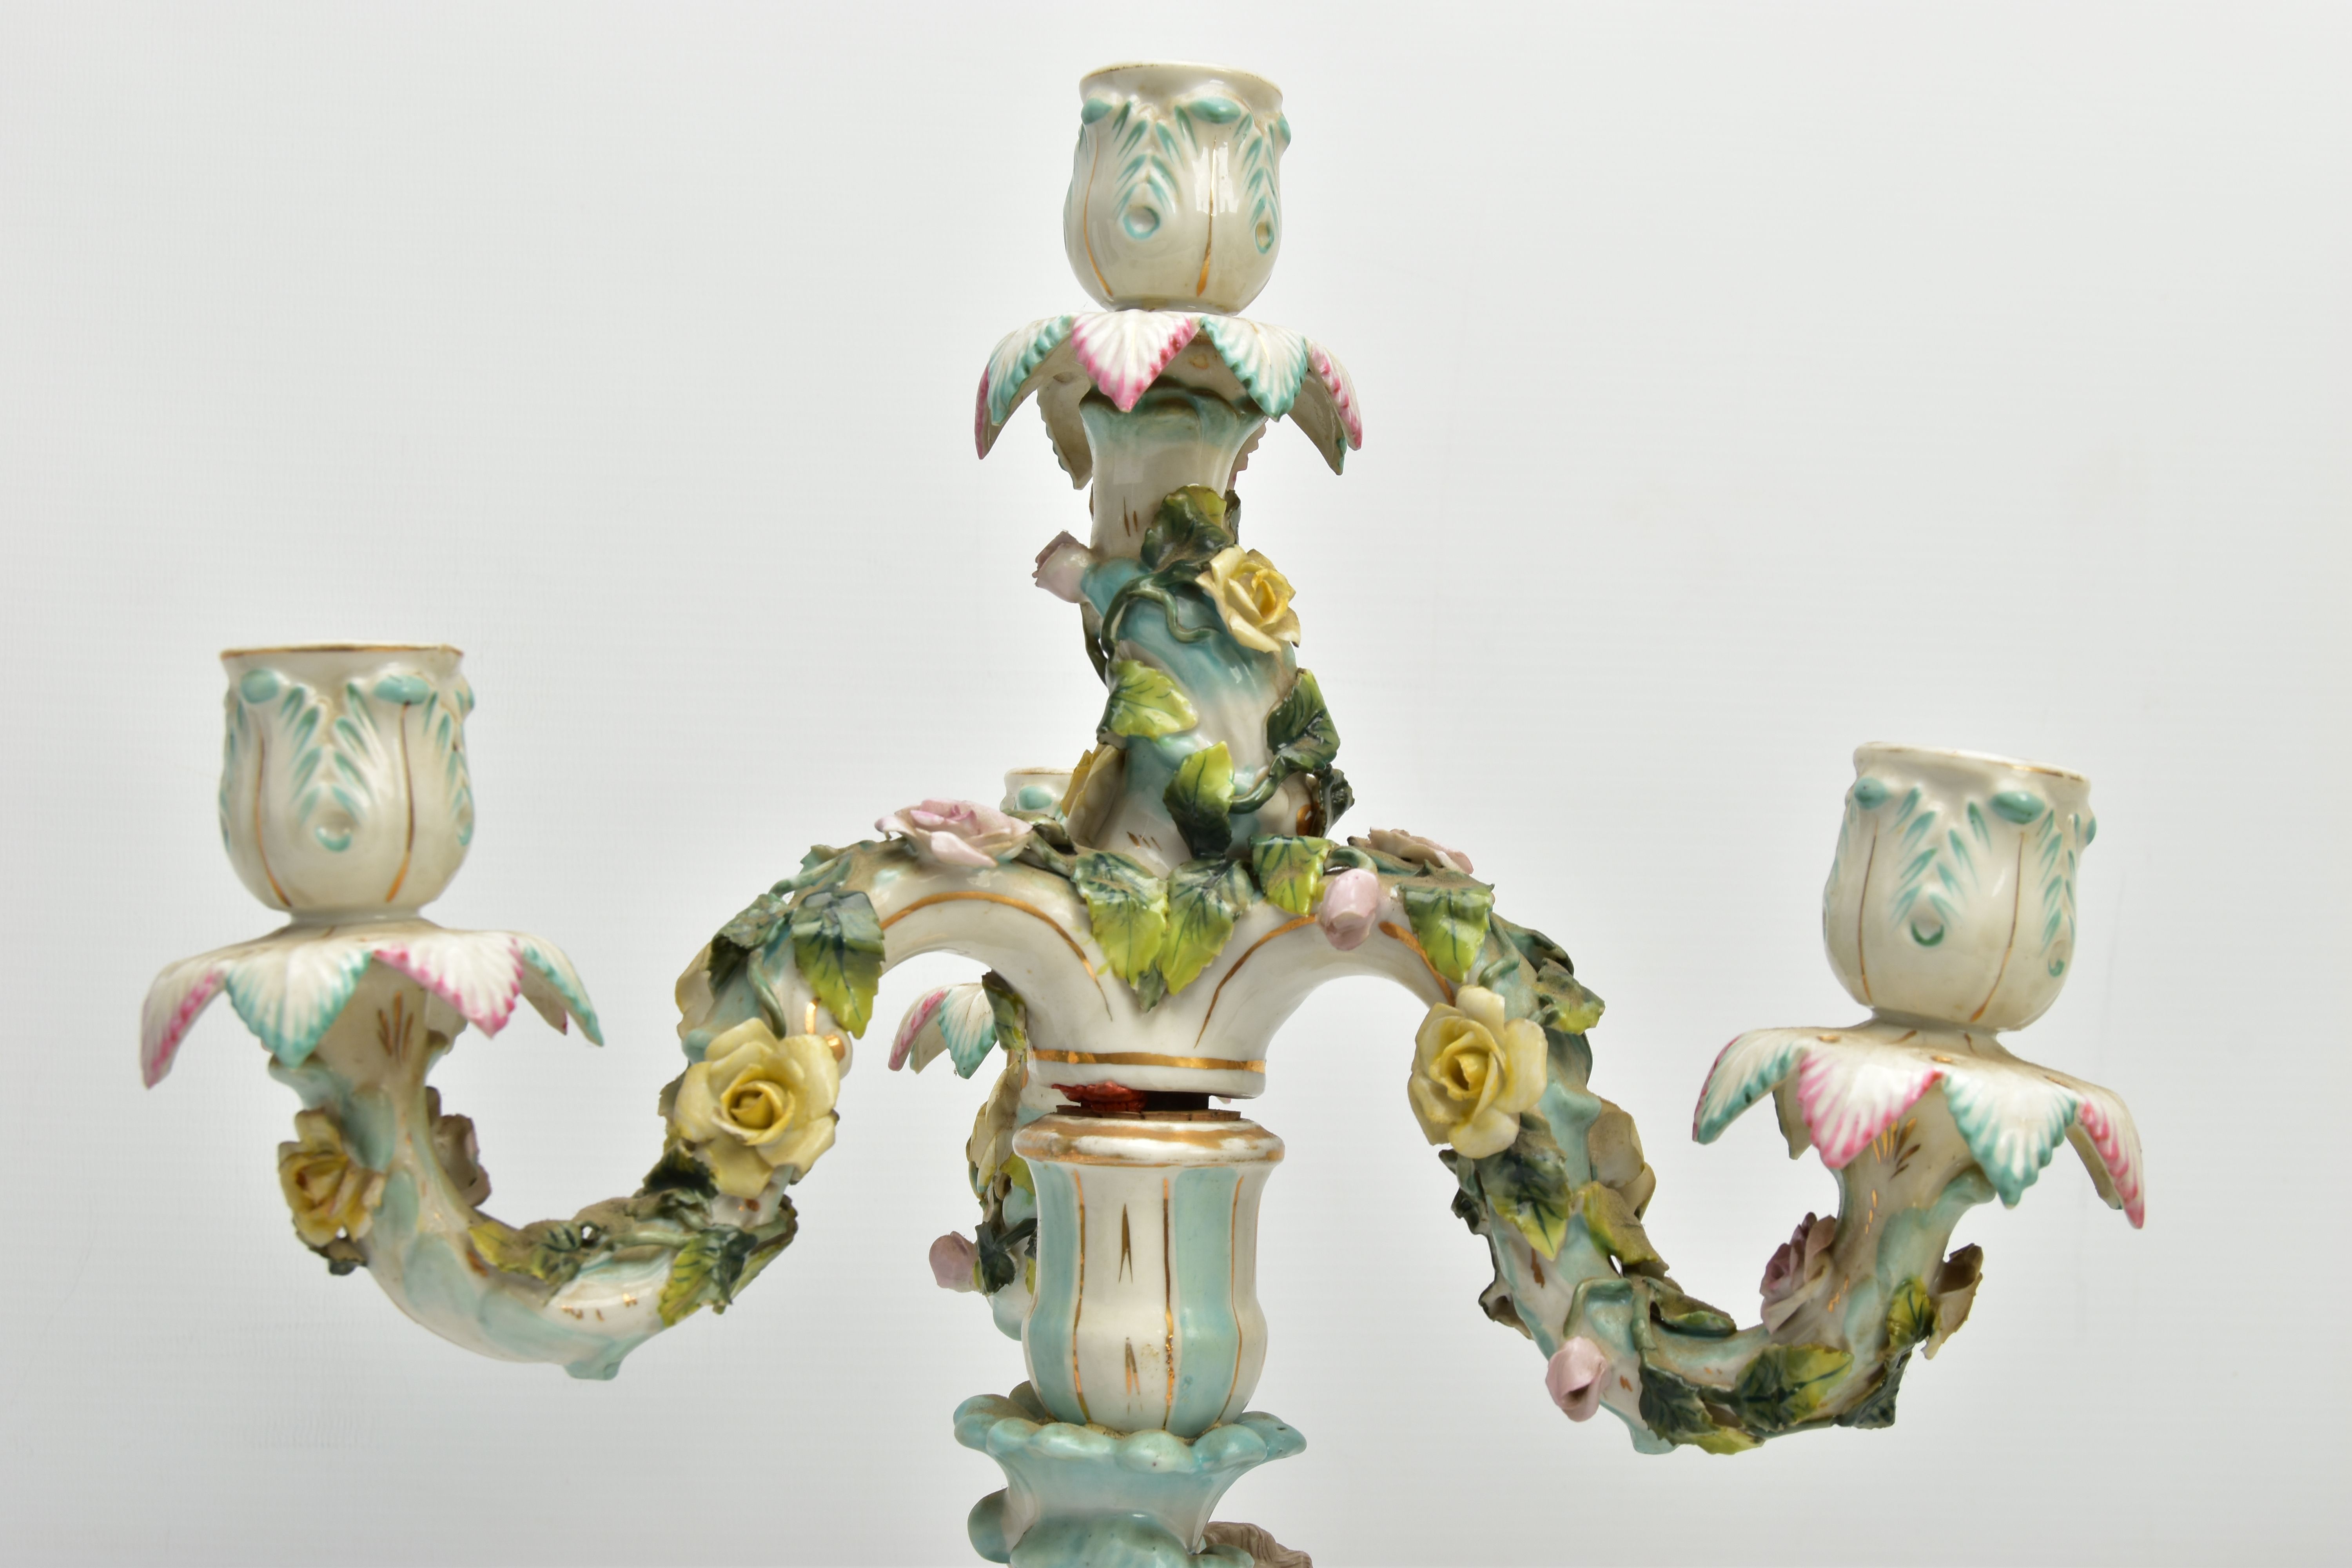 A PAIR OF LATE 19TH / EARLY 20TH CENTURY PLAUE PORCELAIN FLORALLY ENCRUSTED FIGURAL CANDELABRA, each - Image 5 of 23